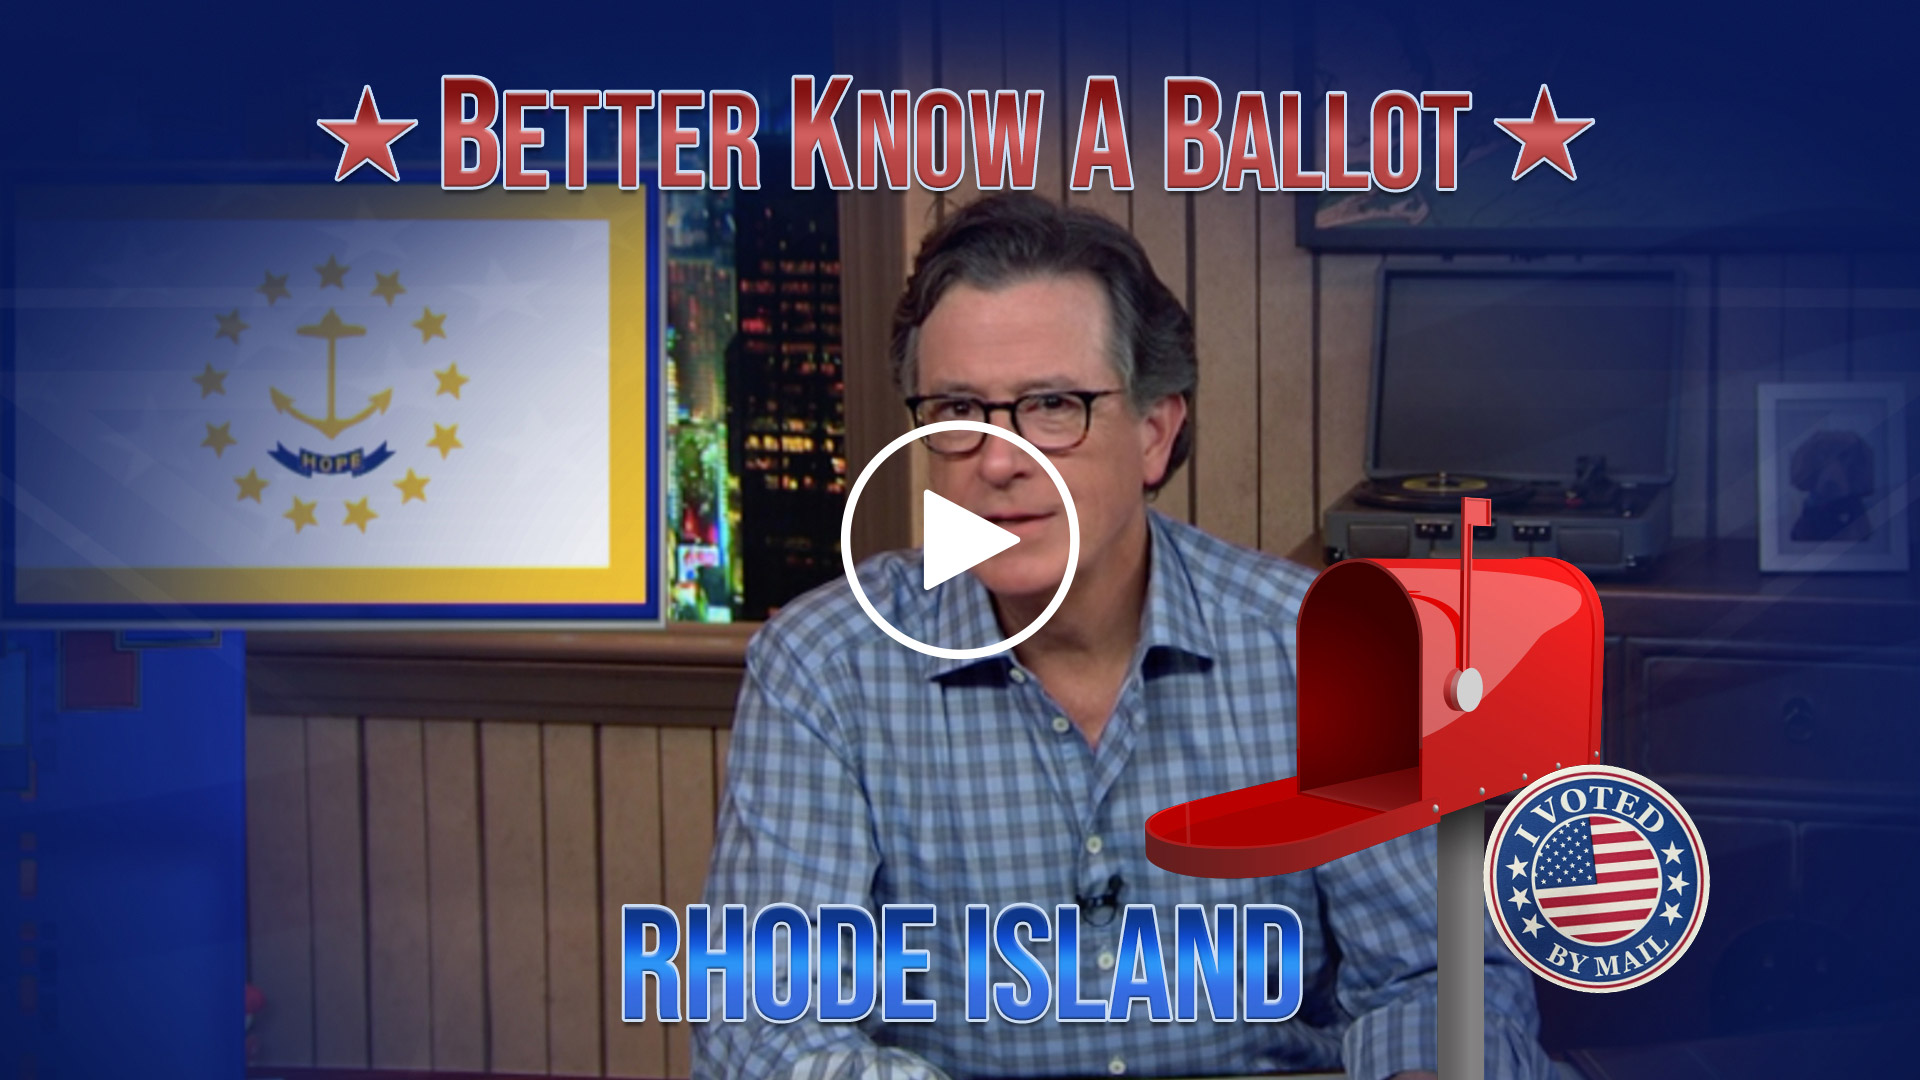 A message from Stephen Colbert FOR THE 2020 ELECTION.